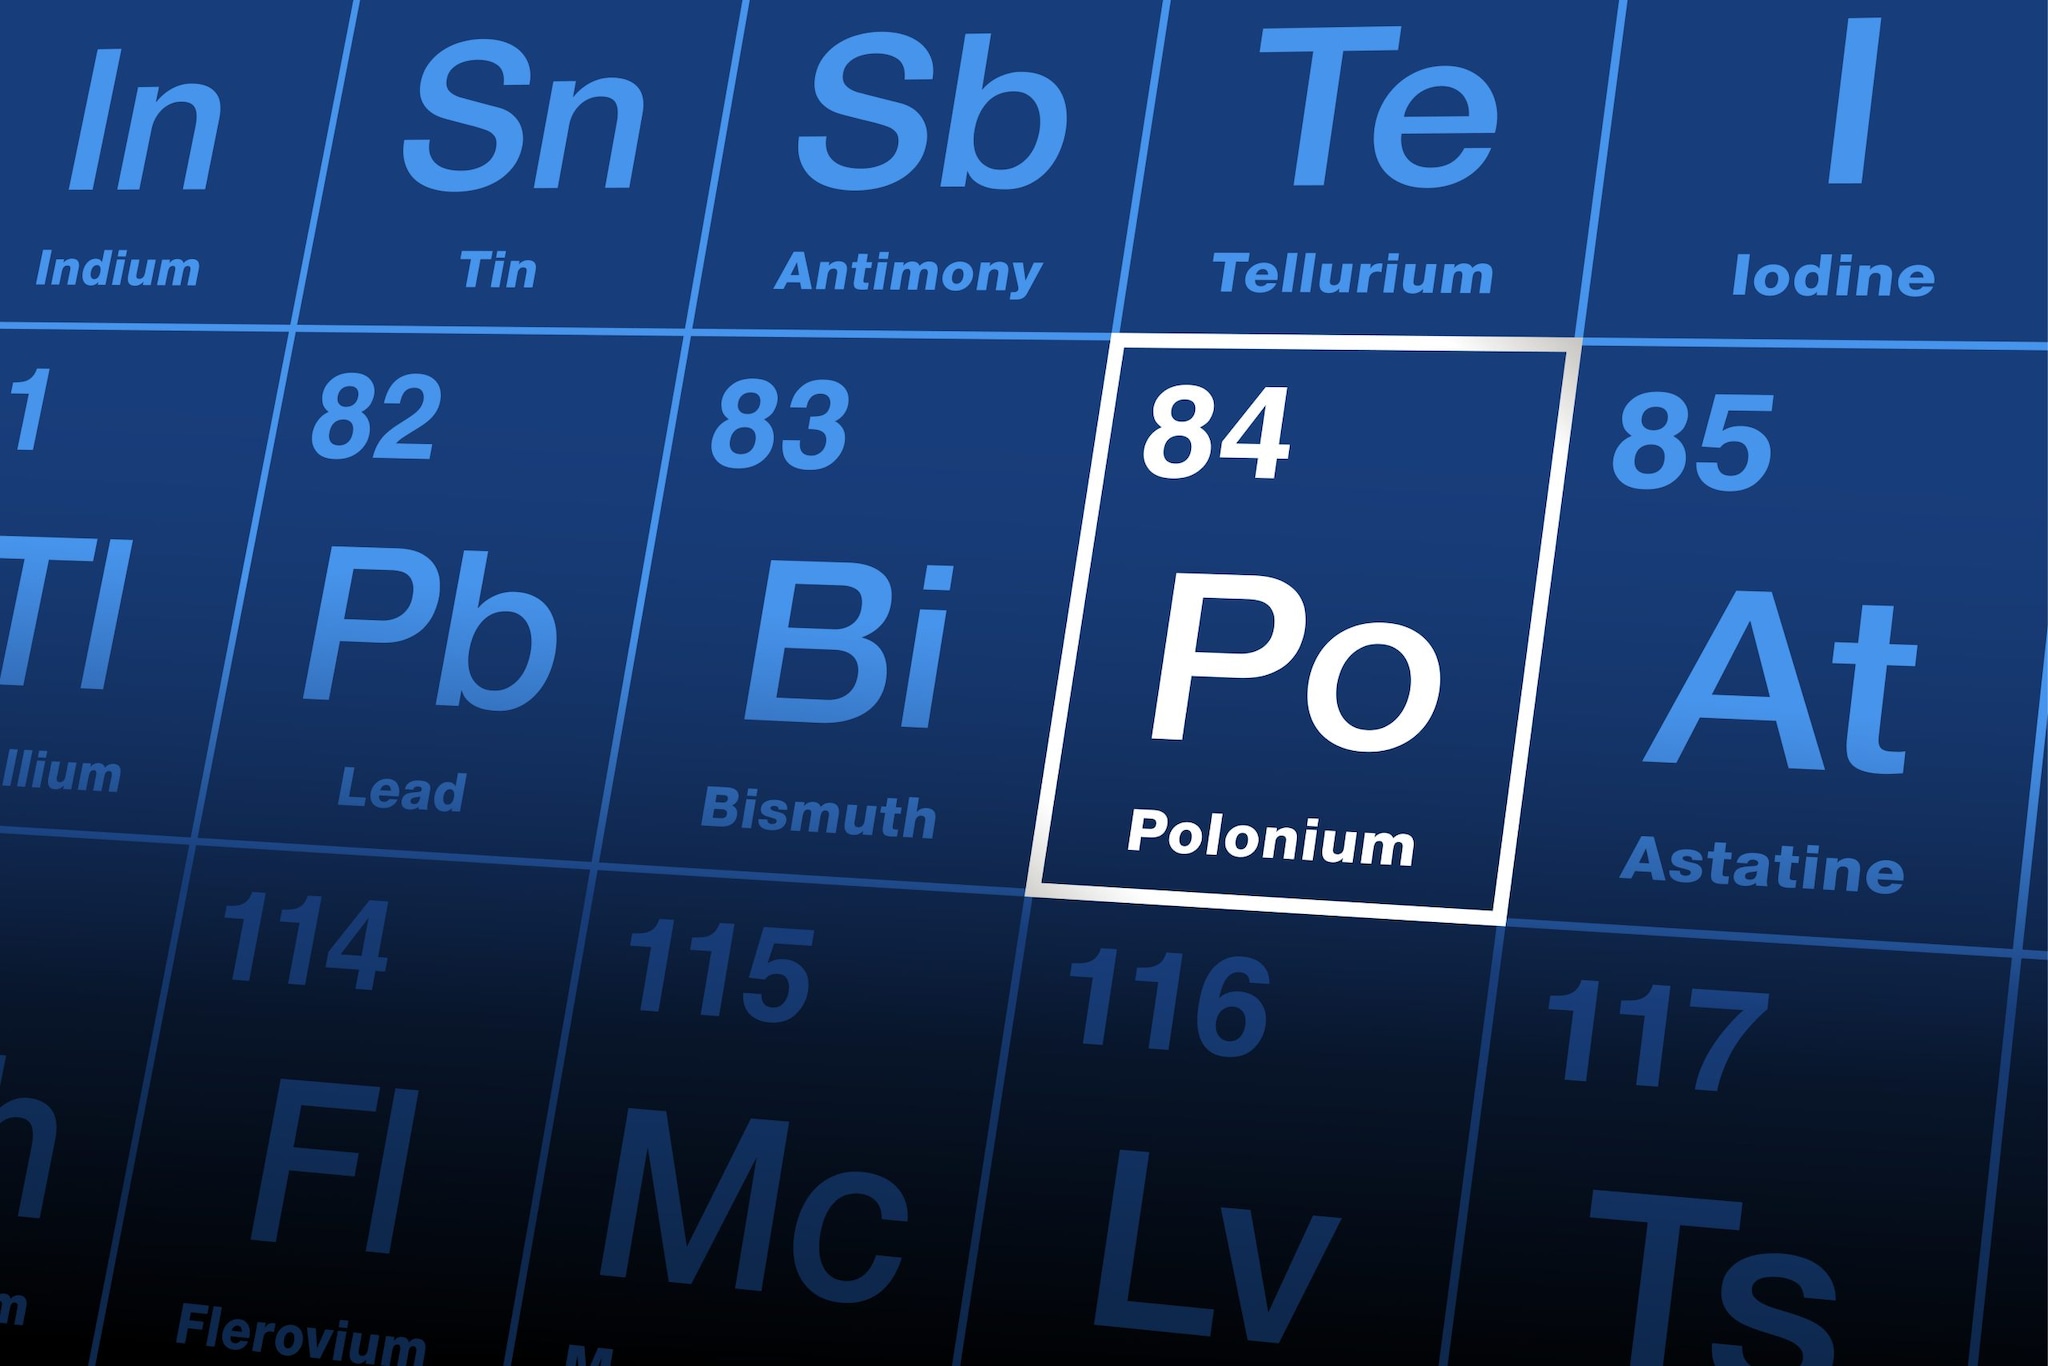 Close-up shot of the periodic table with the element Polonium highlighted in a white box